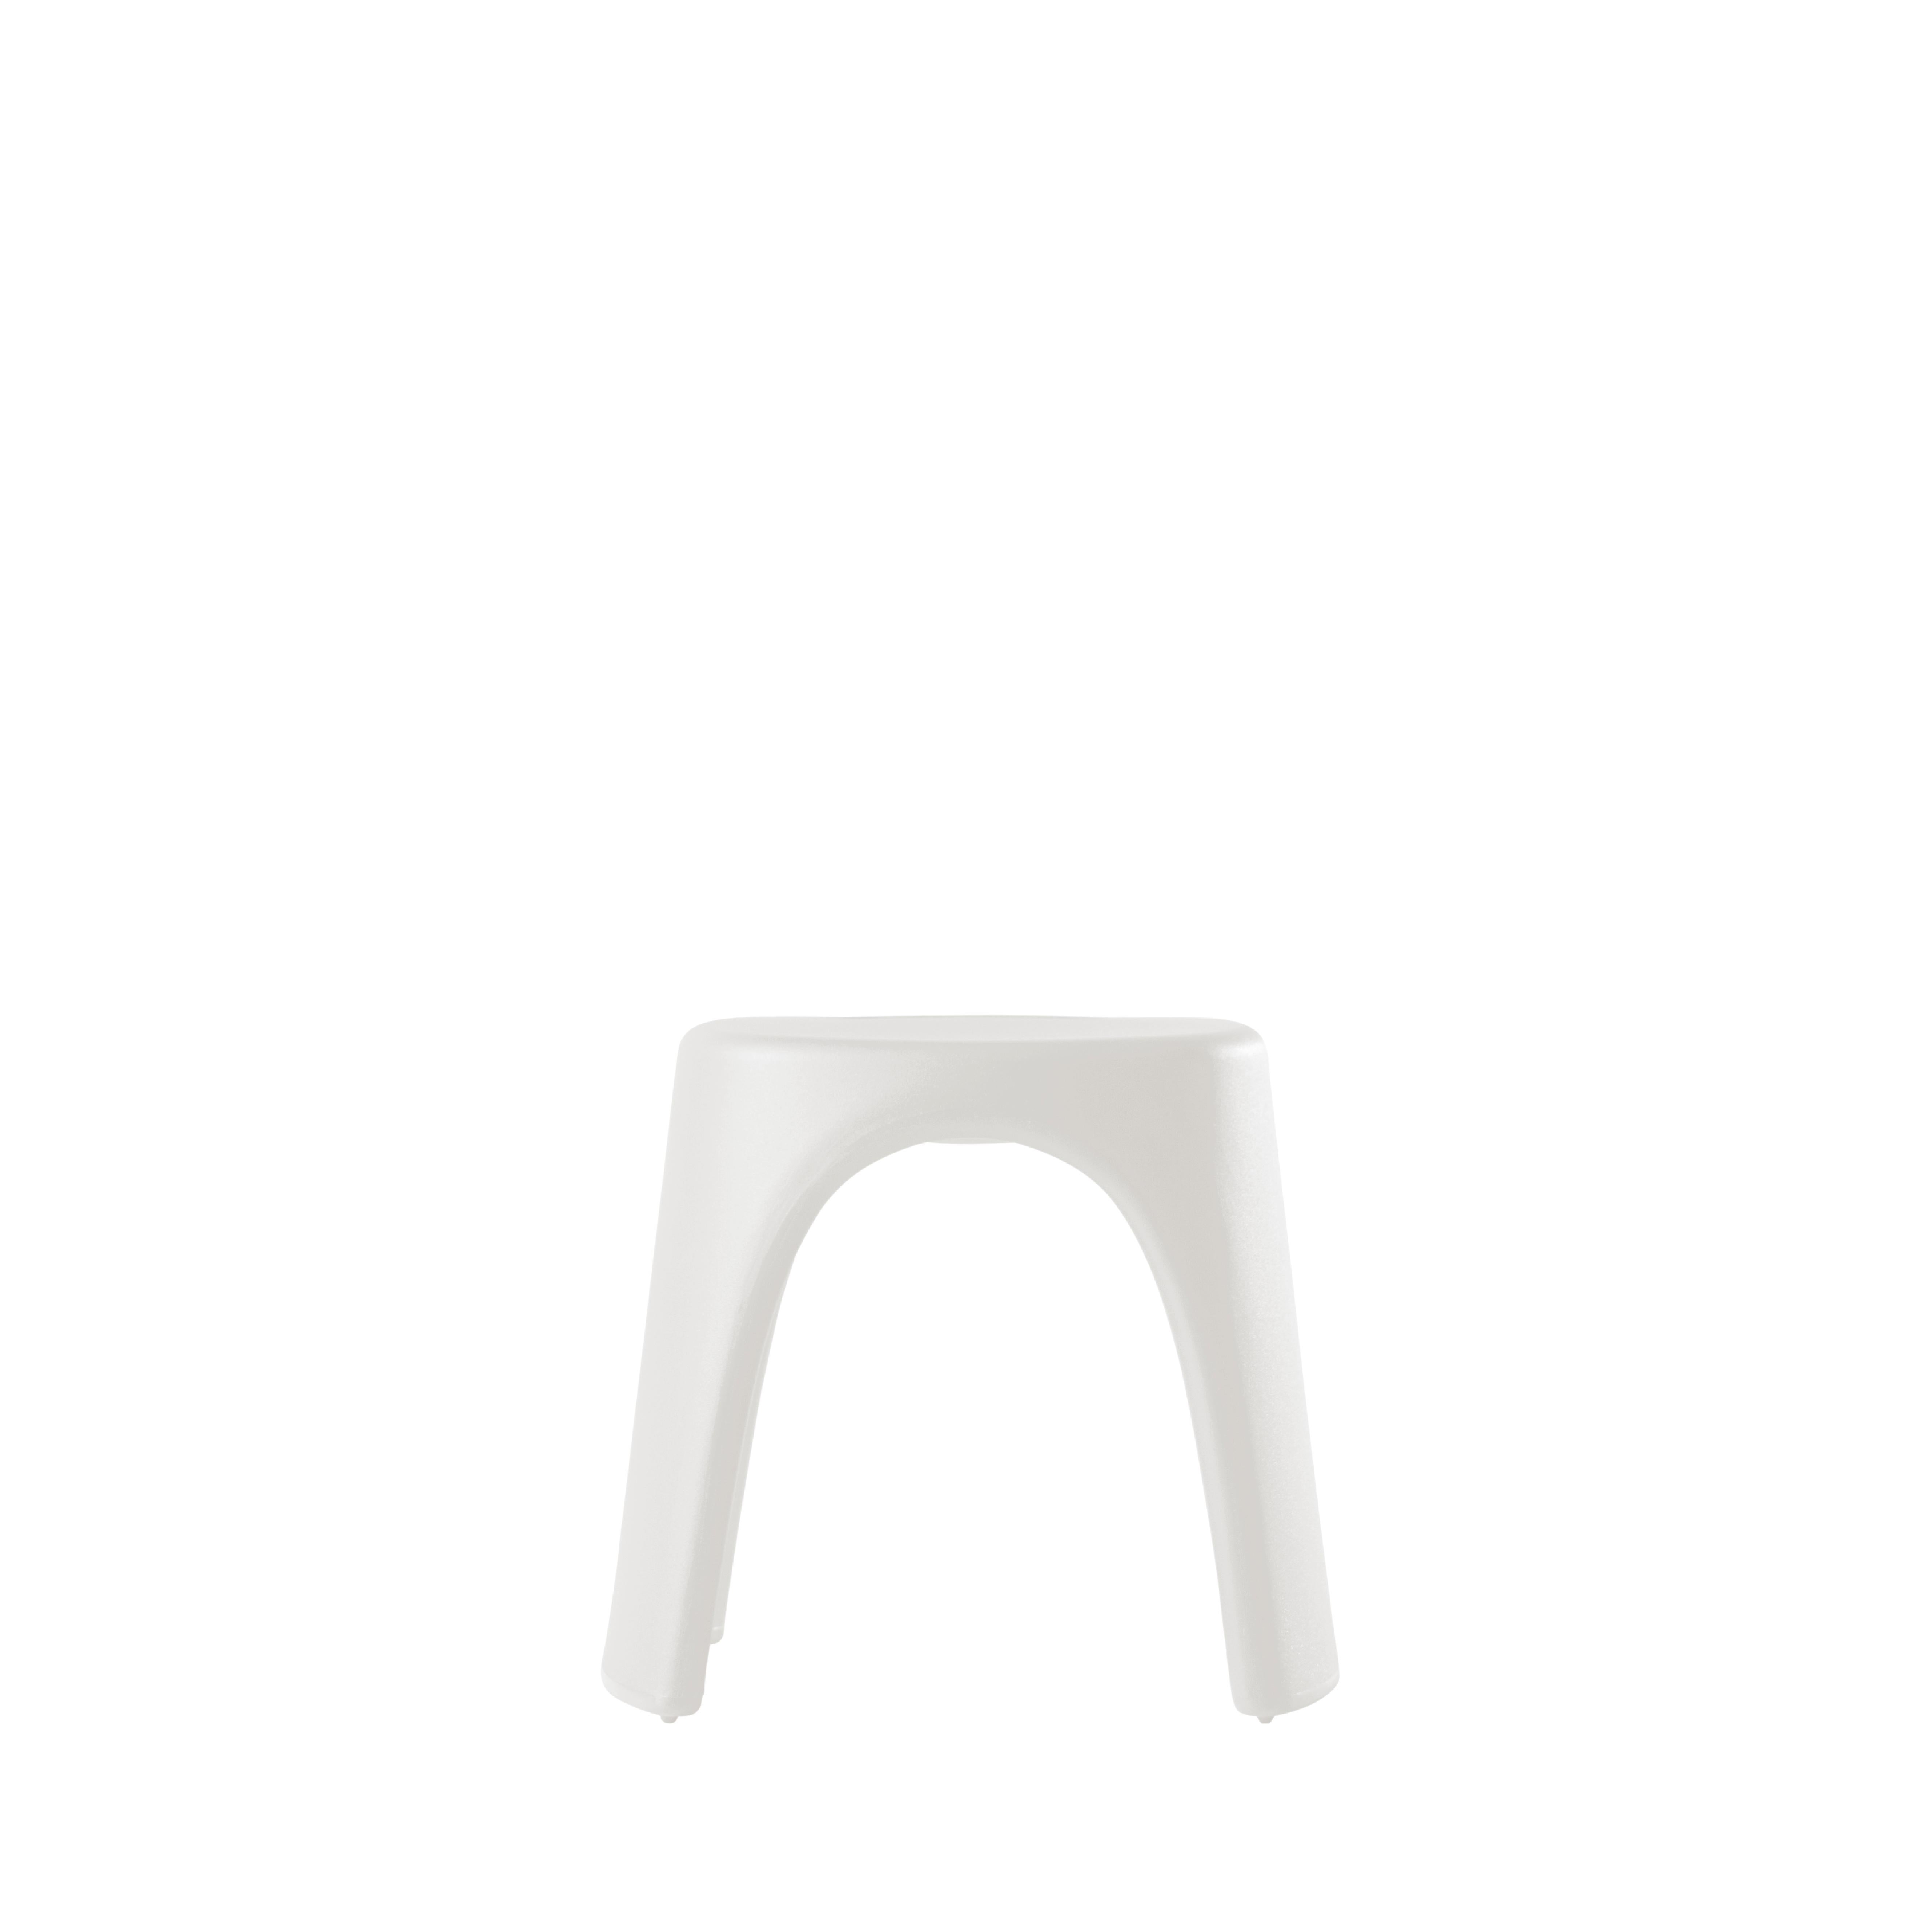 Chocolate Brown Amélie Sgabello Stool by Italo Pertichini
Dimensions: D 40 x W 46 x H 43 cm.
Materials: Polyethylene.
Weight: 4 kg.

Available in a standard version and lacquered version. Prices may vary. Available in different color options. This